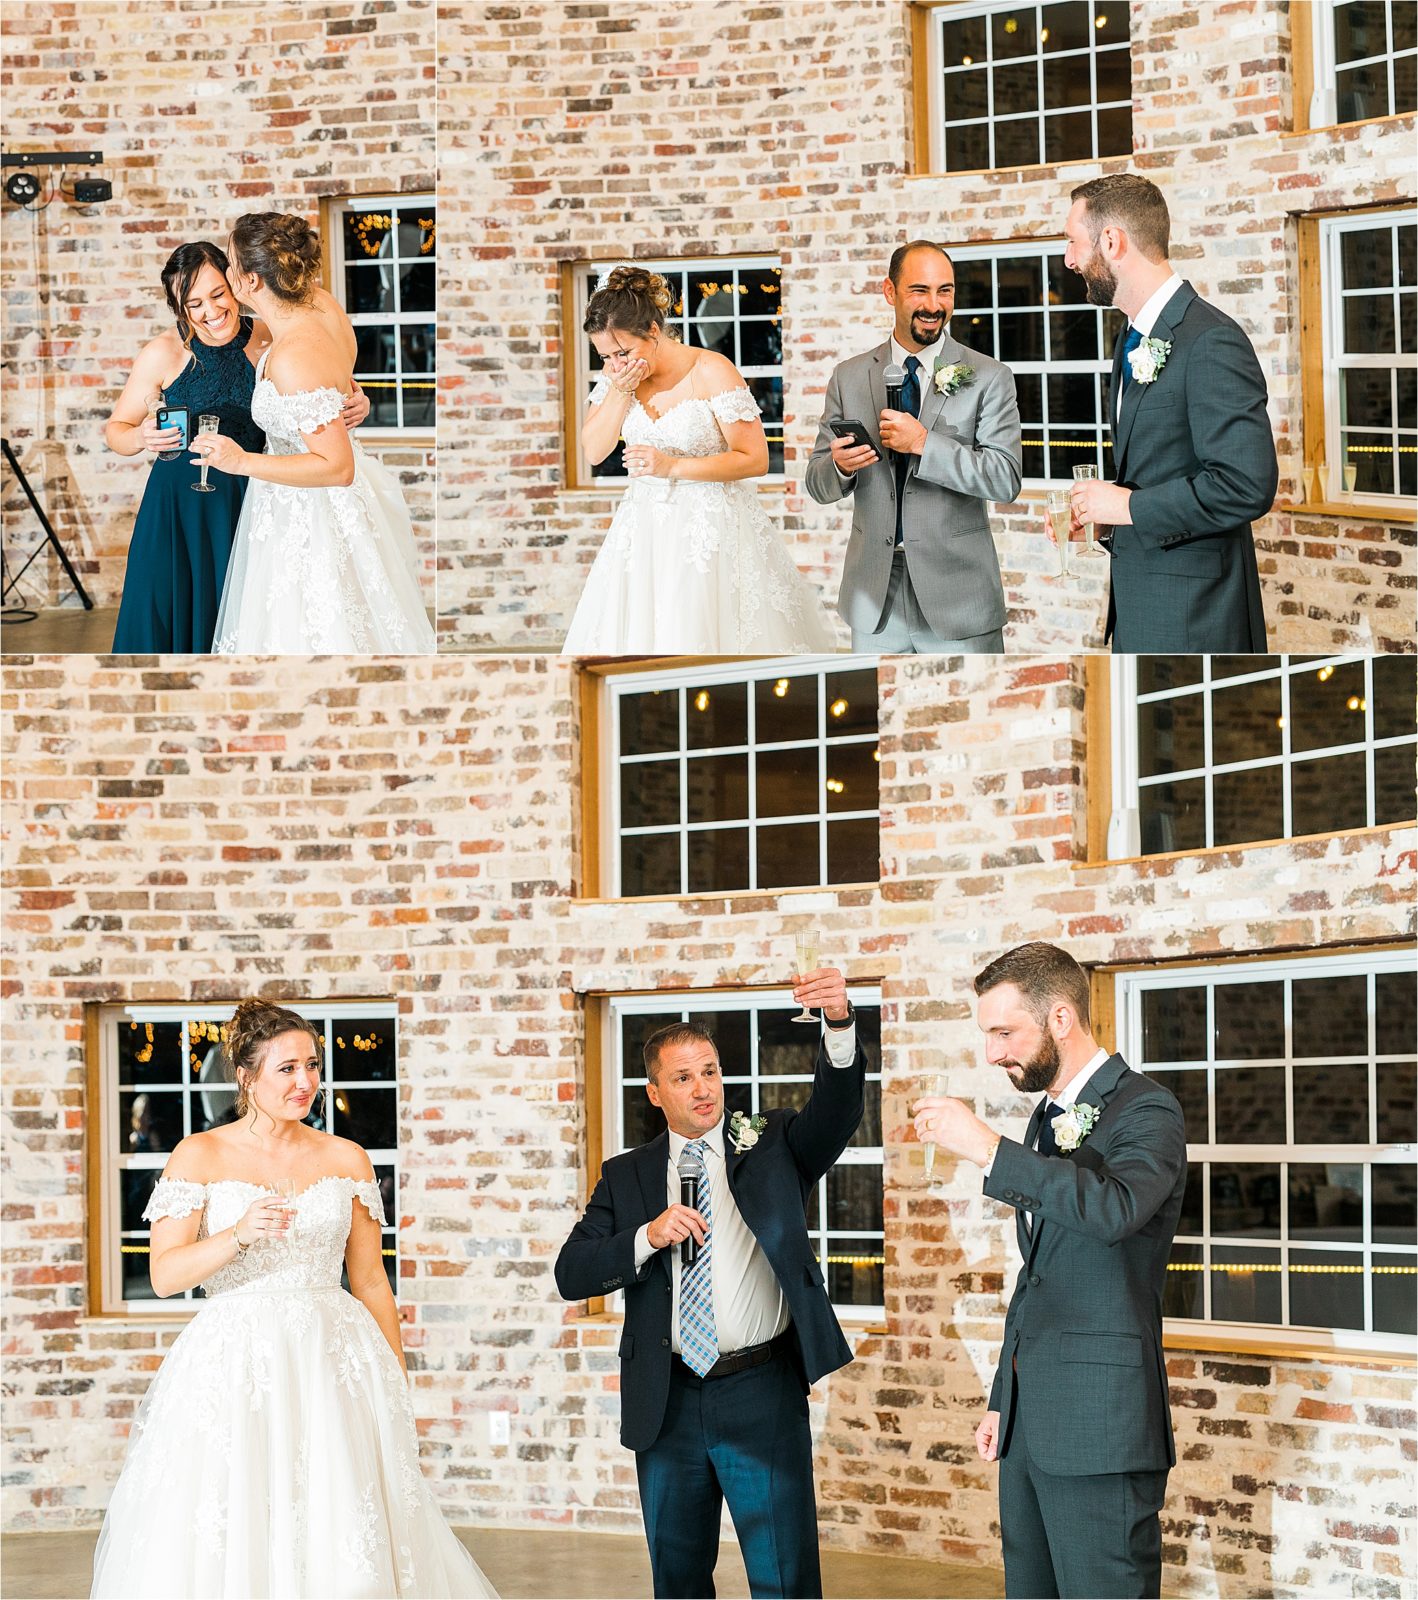  A newlywed couple shares laughs and hugs with their bridal party during wedding reception speeches 